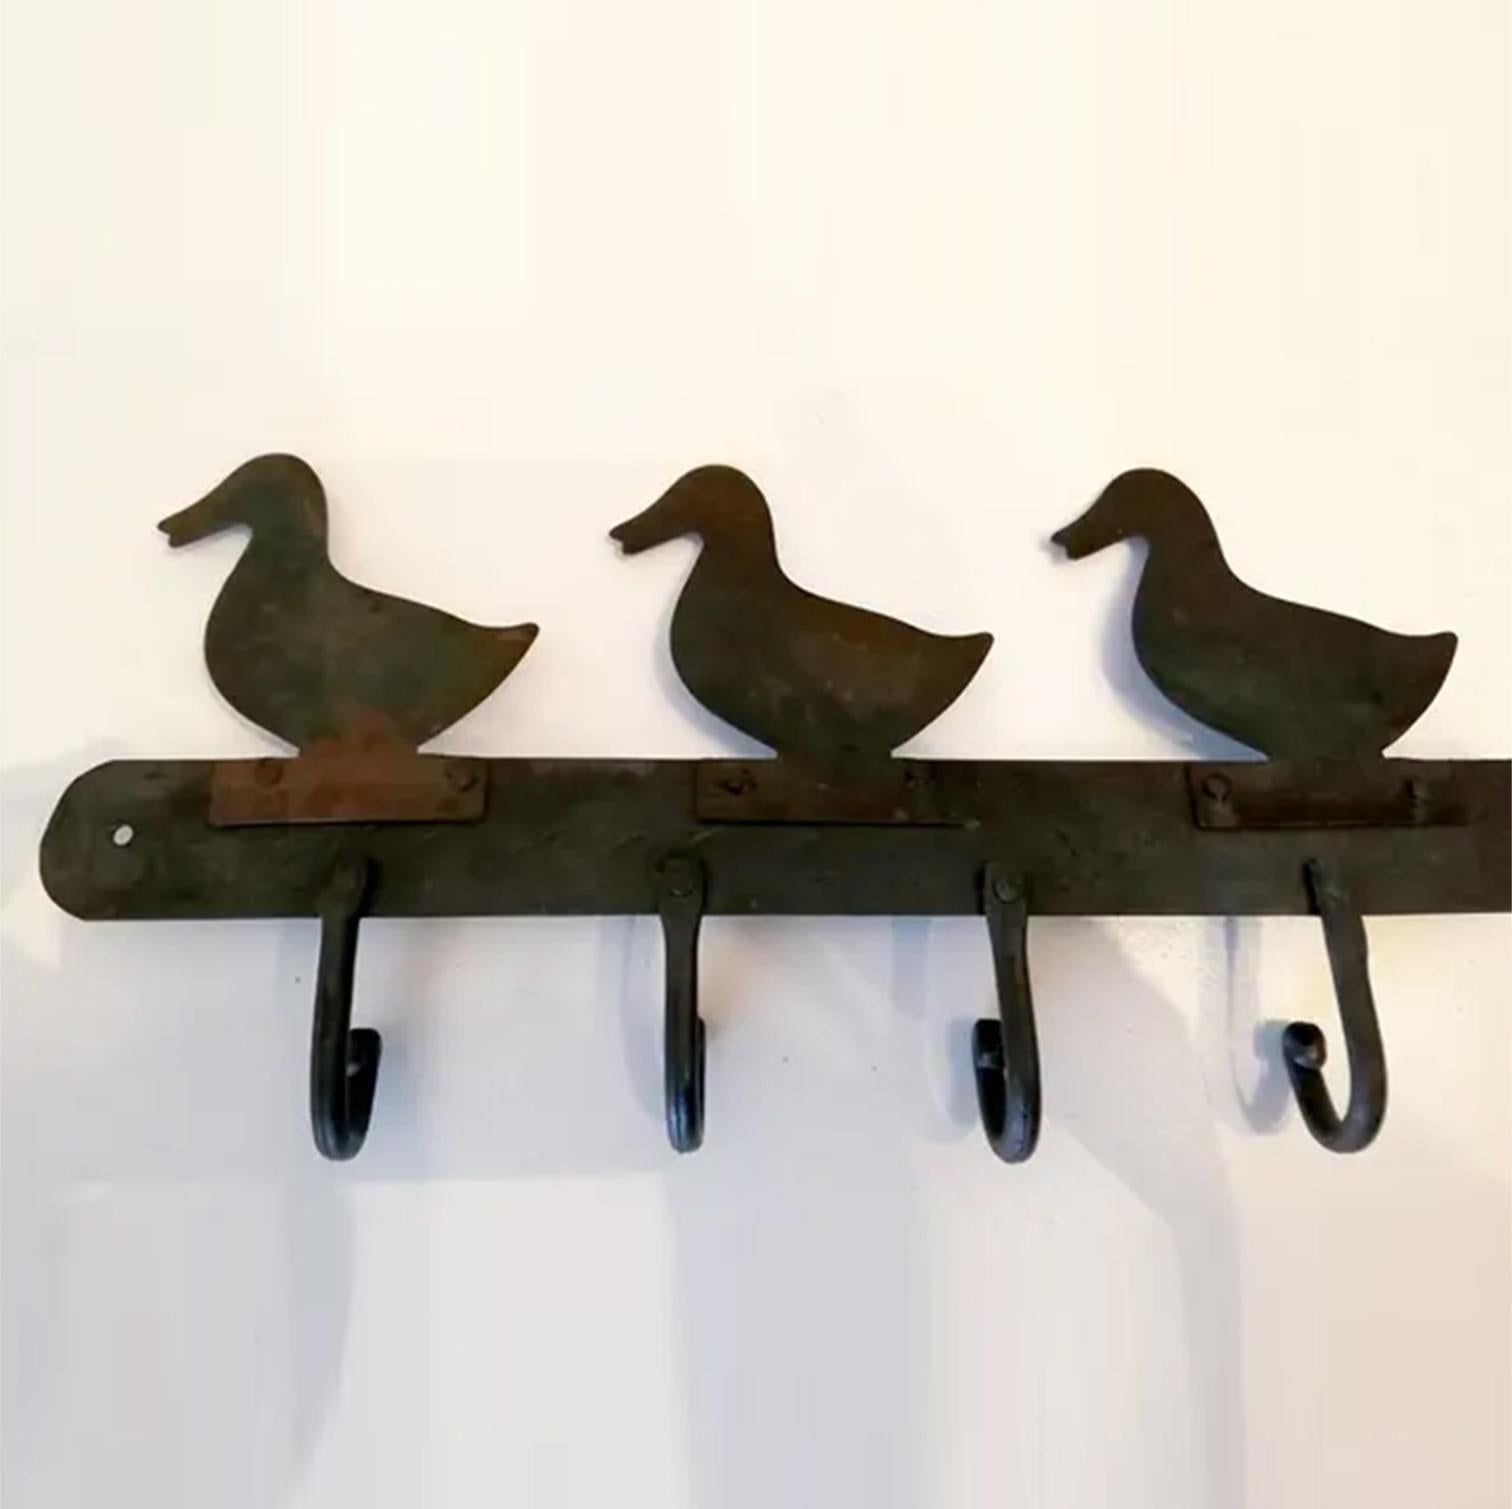 Ducks shaped handmade iron kitchen hanger

Handmade hanger to hang utensils or kitchen towels or as a hanger to hang other utensils. This old coat hanger, coat rack or hanger can also be used as a hanger to hang anything, coat, umbrella, hats

 